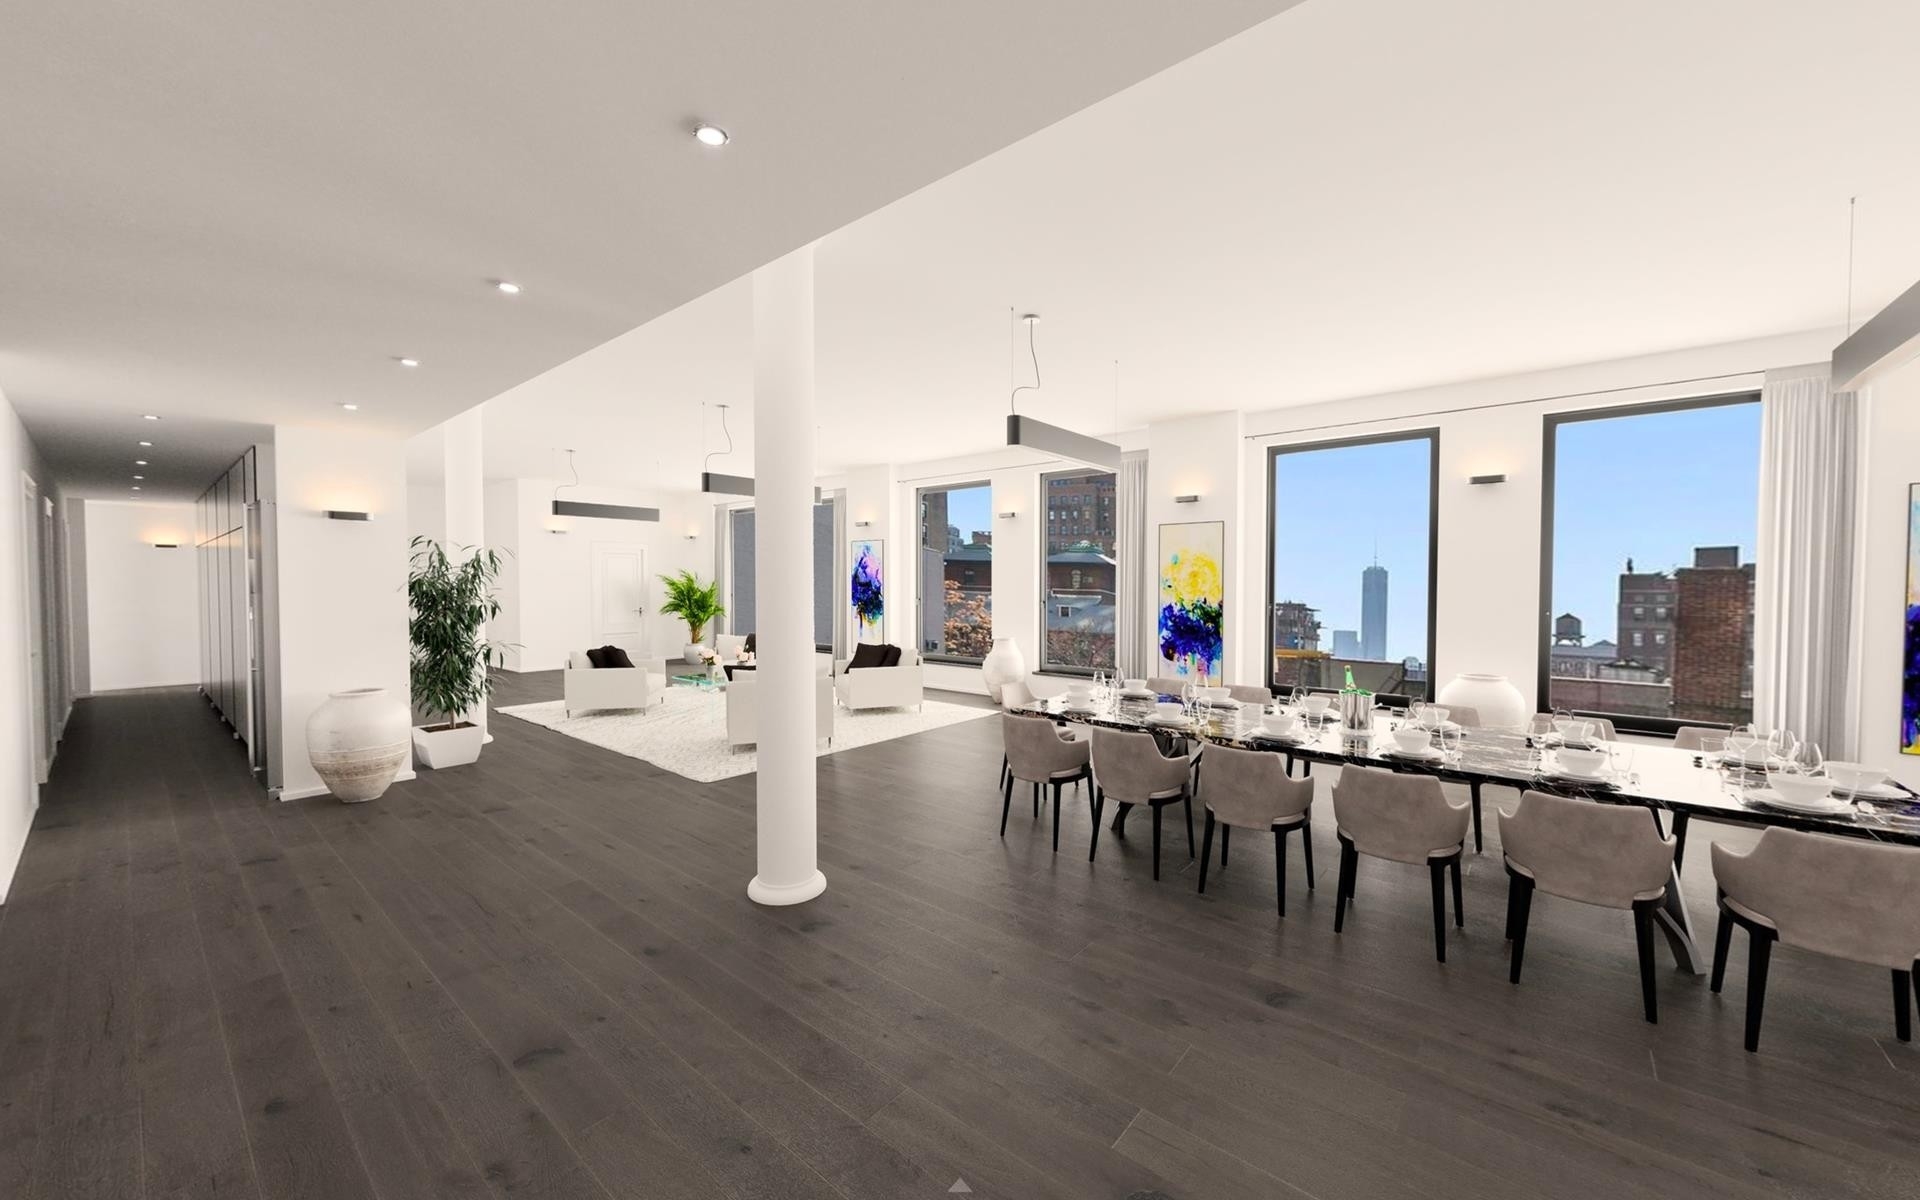 Co-op Properties for Sale at 227 W 17TH ST, 5 Chelsea, New York, NY 10011